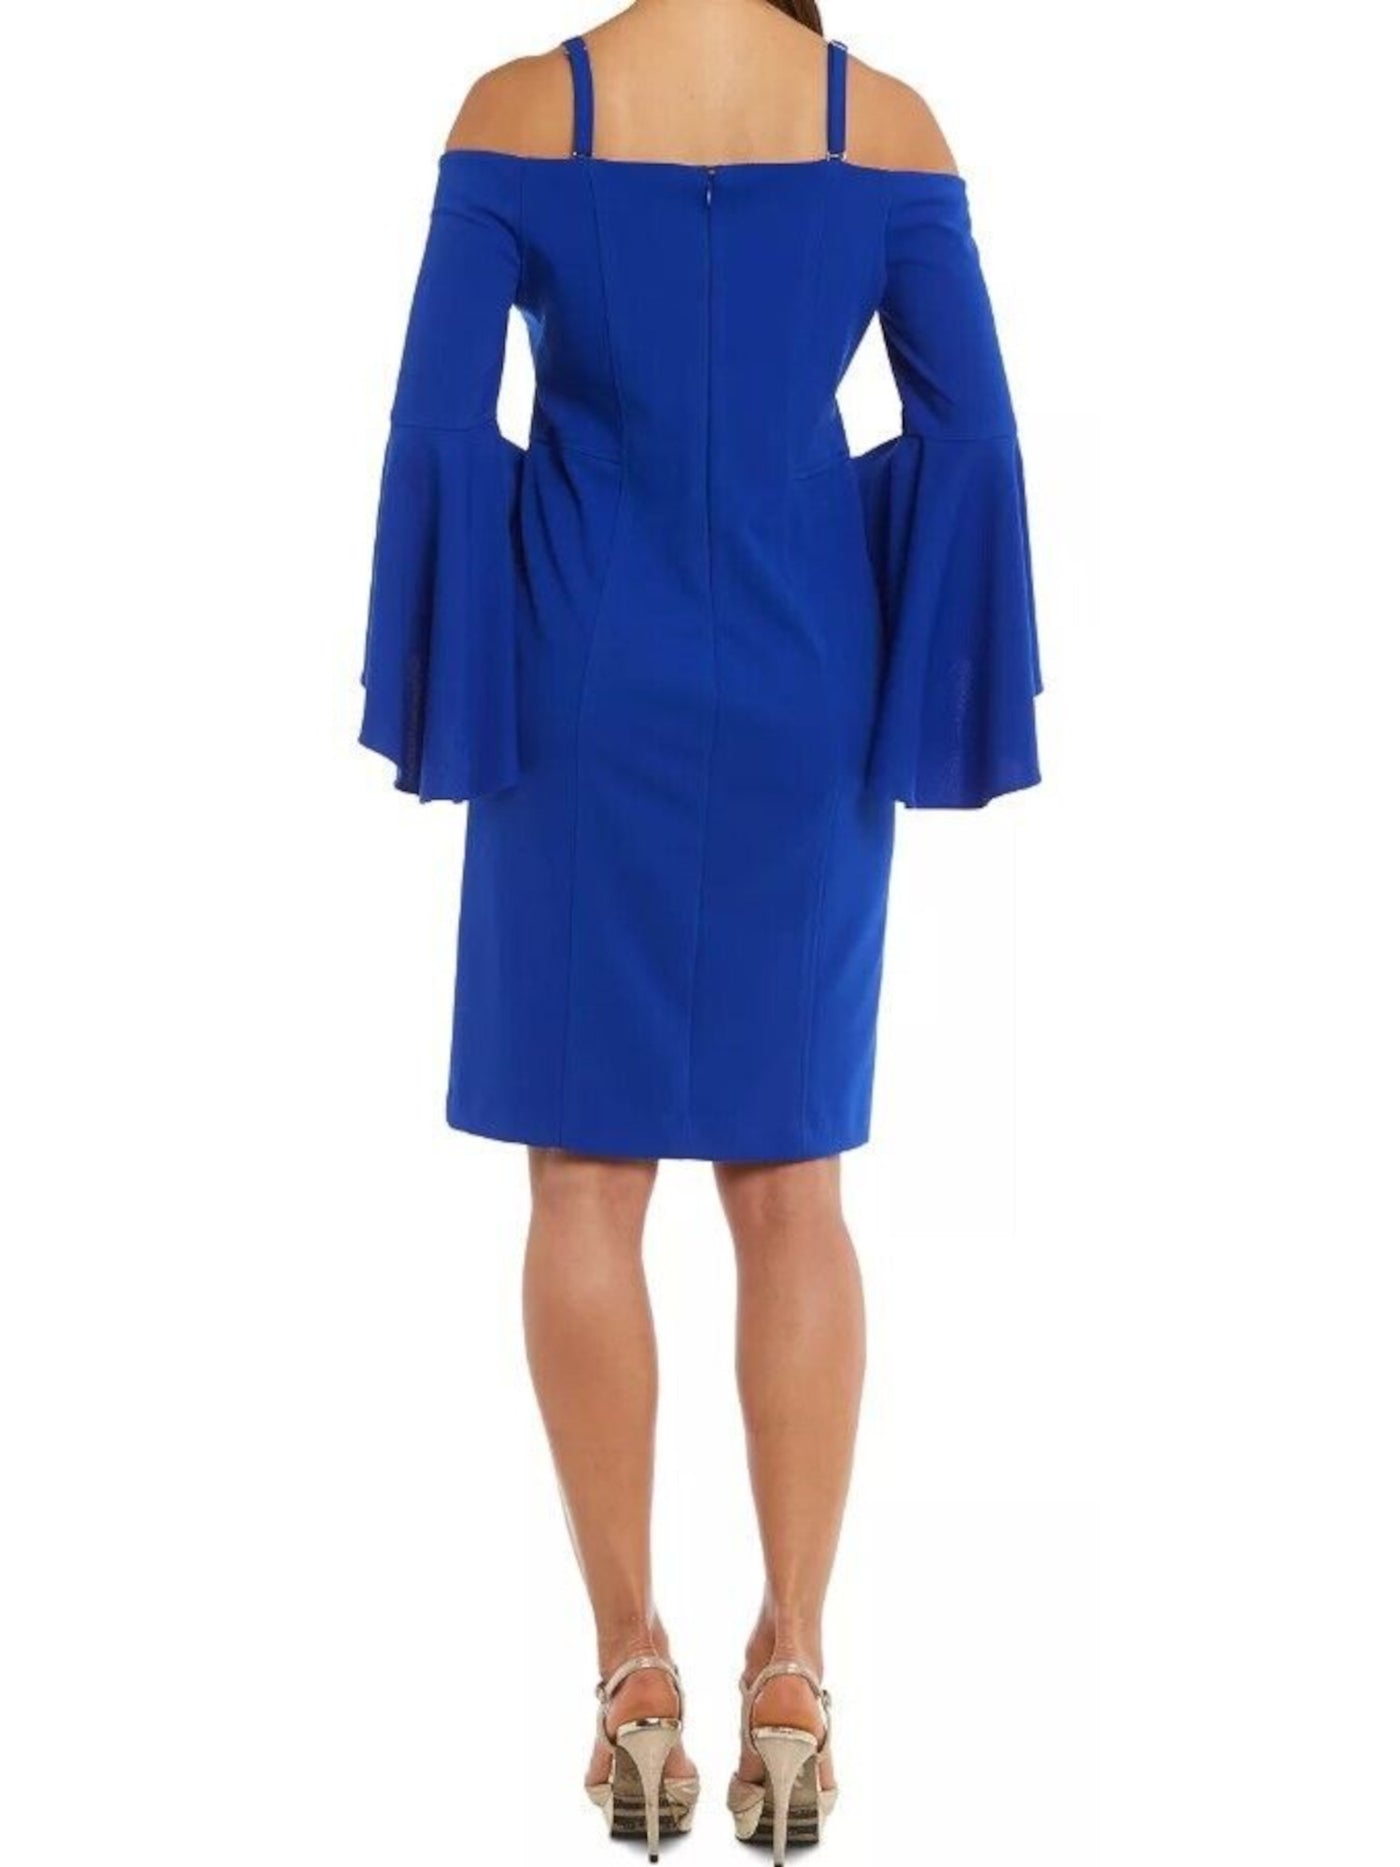 R&M RICHARDS Womens Blue Stretch Zippered Ruffled Removable Straps Bell Sleeve Off Shoulder Above The Knee Cocktail Sheath Dress 14